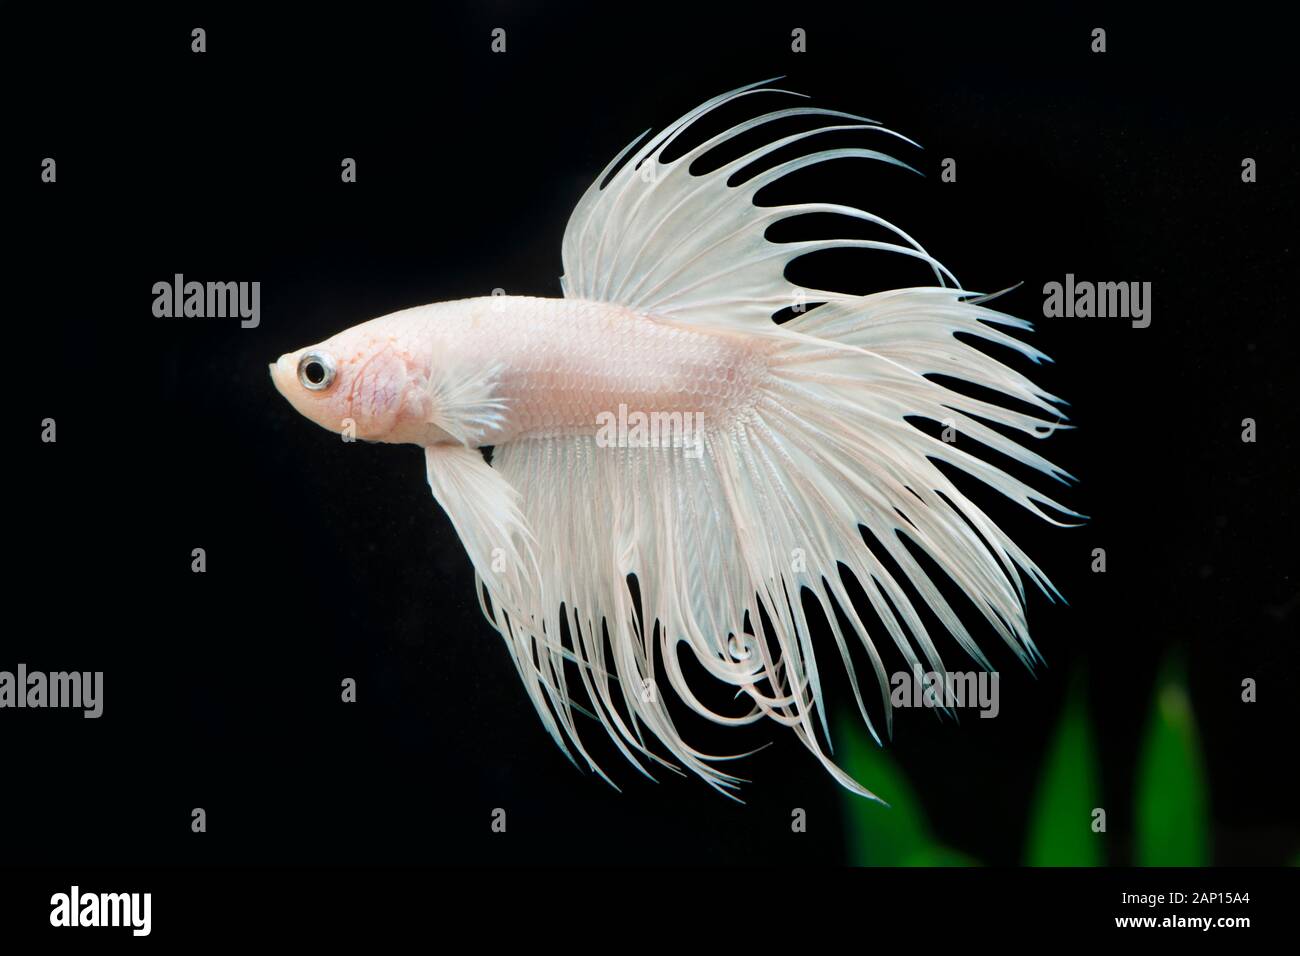 Siamese Fighter (Betta splendens Crowntail White Opaque). Adult fish under water. Germany Stock Photo